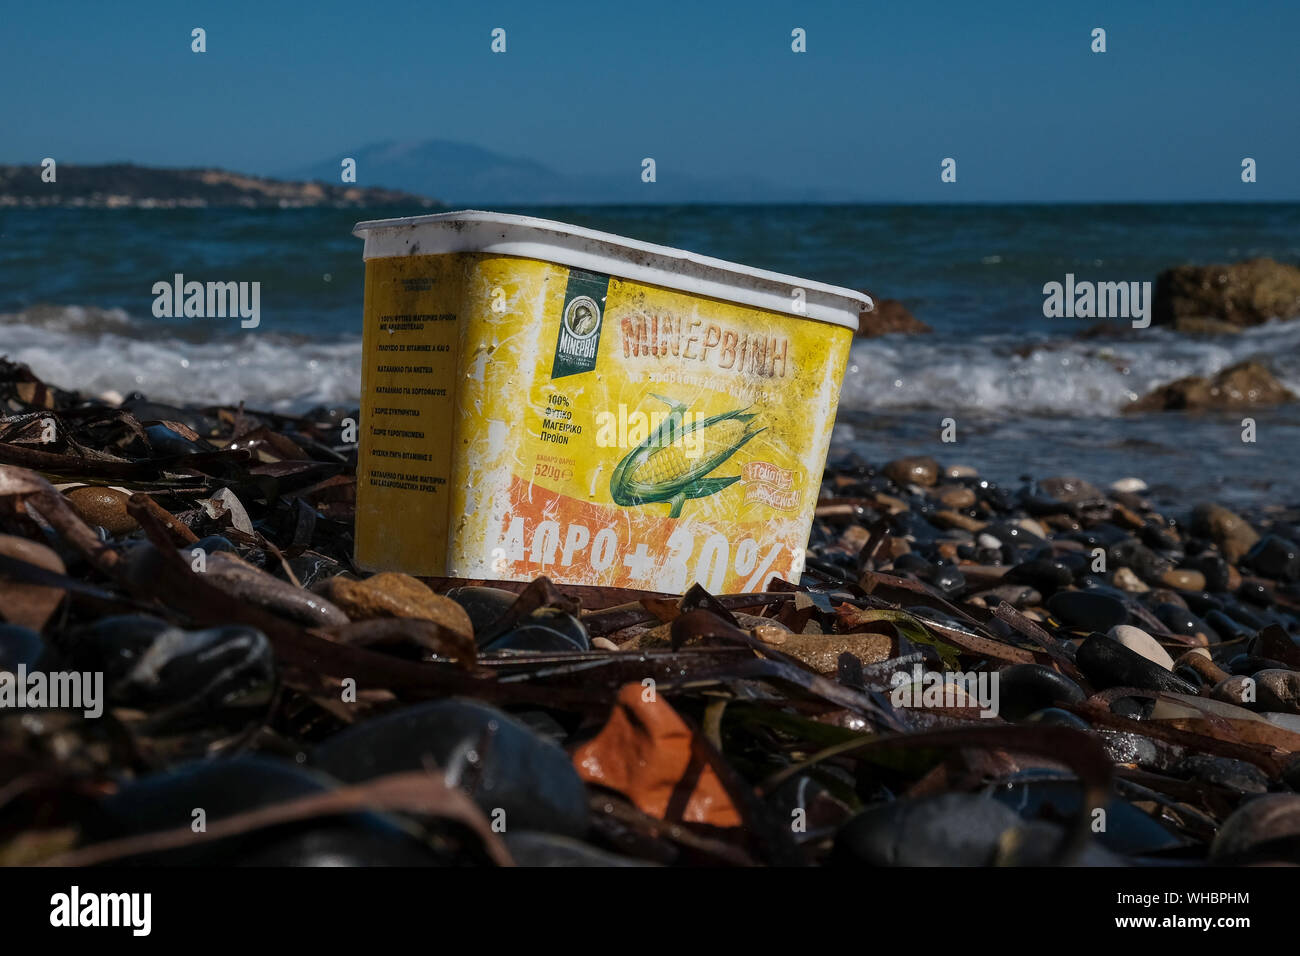 A plastic Sweetcorn container discarded on the beach with water fading and damage adding to the now pollution of the ocean and environment damage. Stock Photo